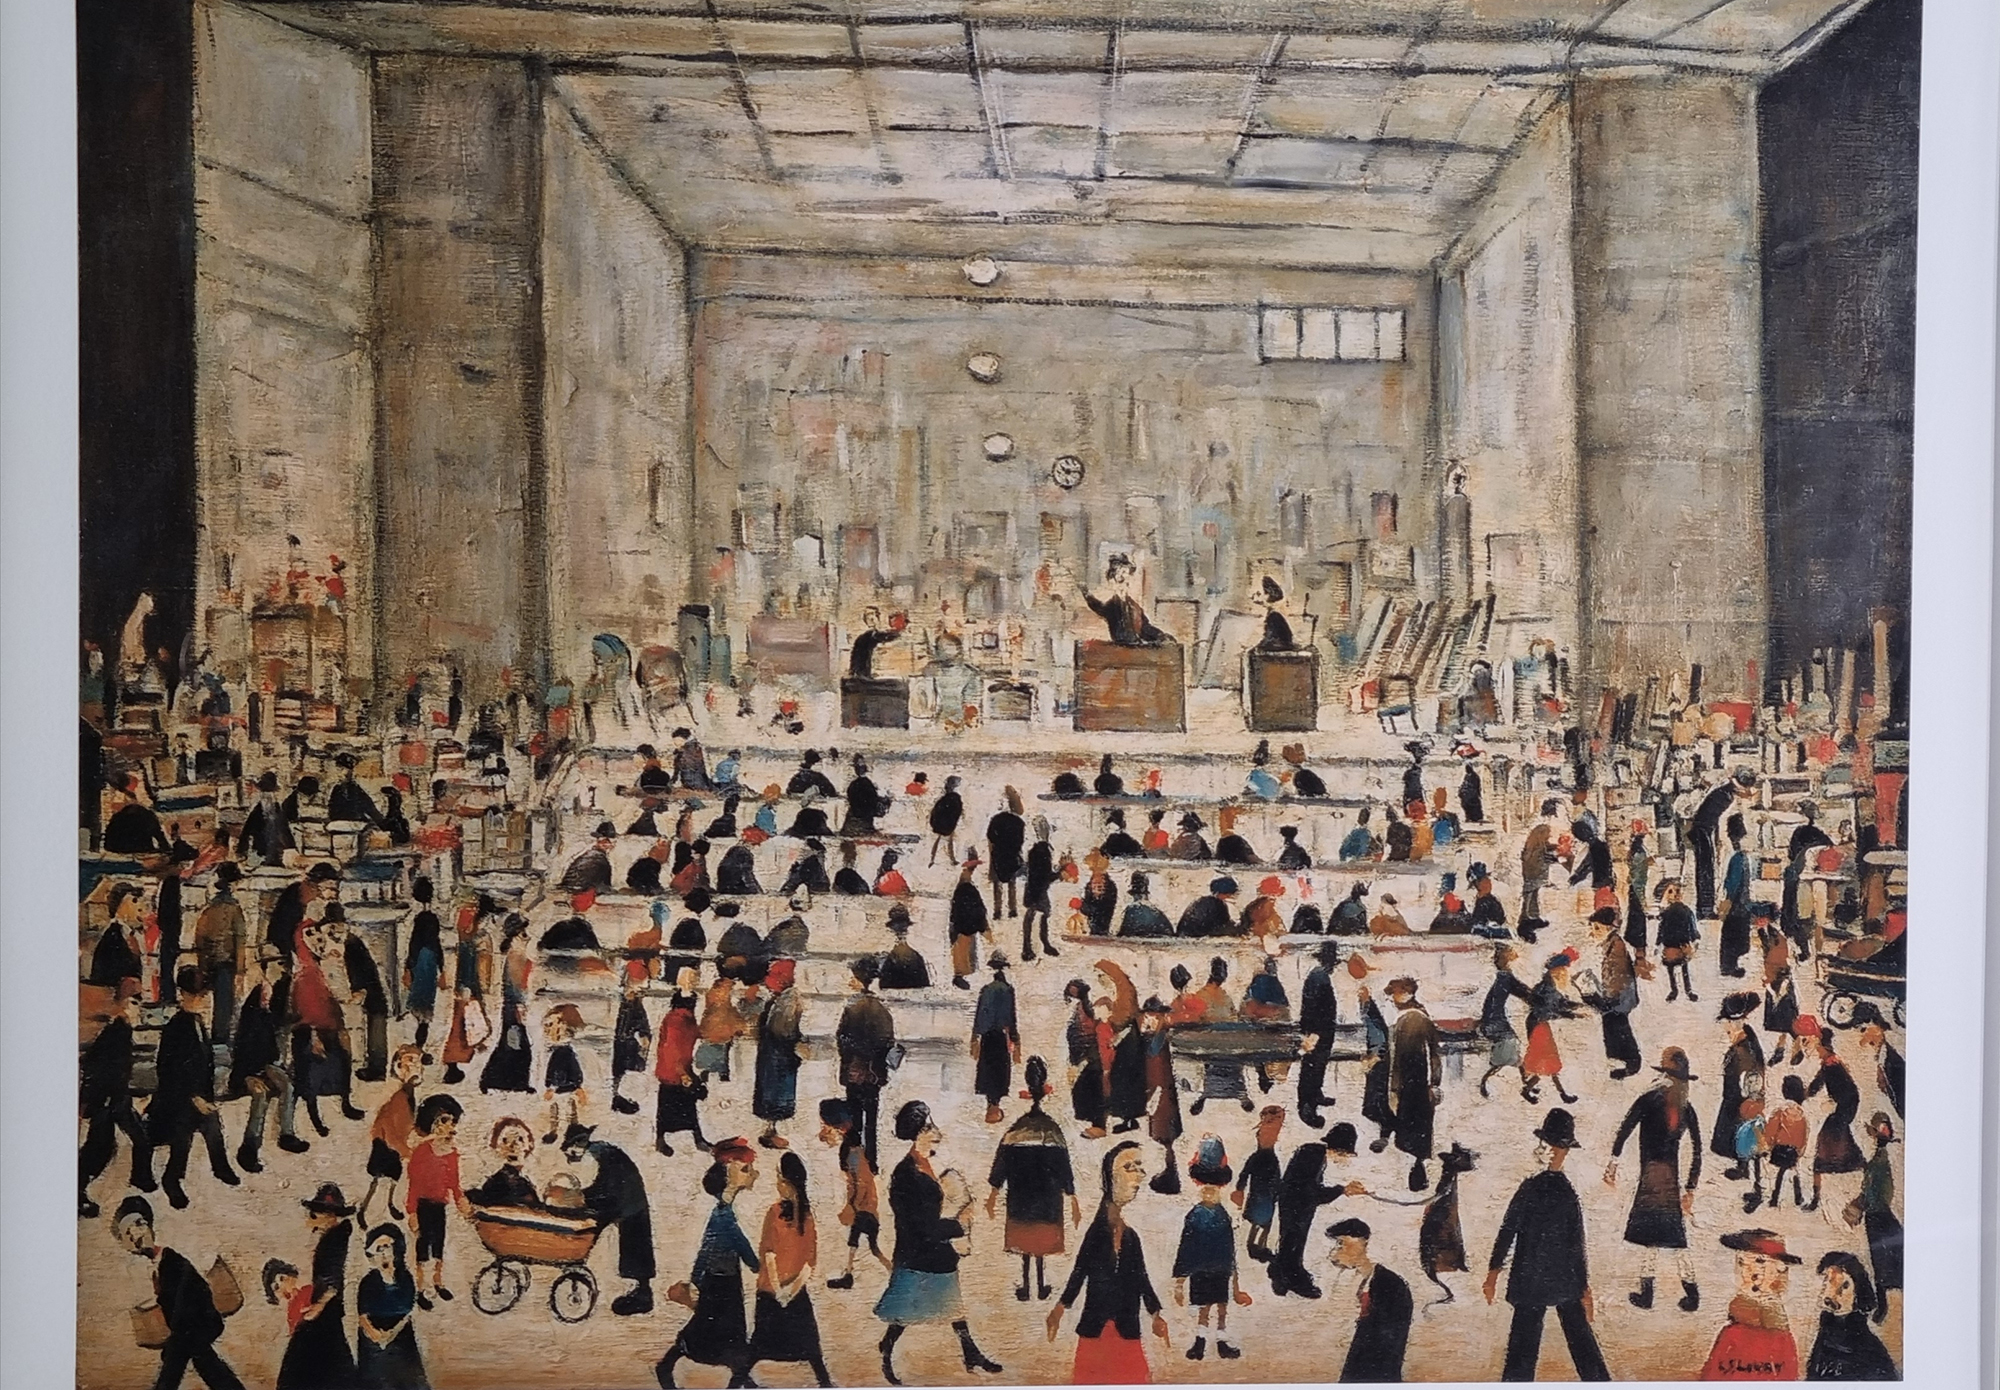 L.S. Lowry Limited Edition """"The Auction"""" - Image 2 of 9